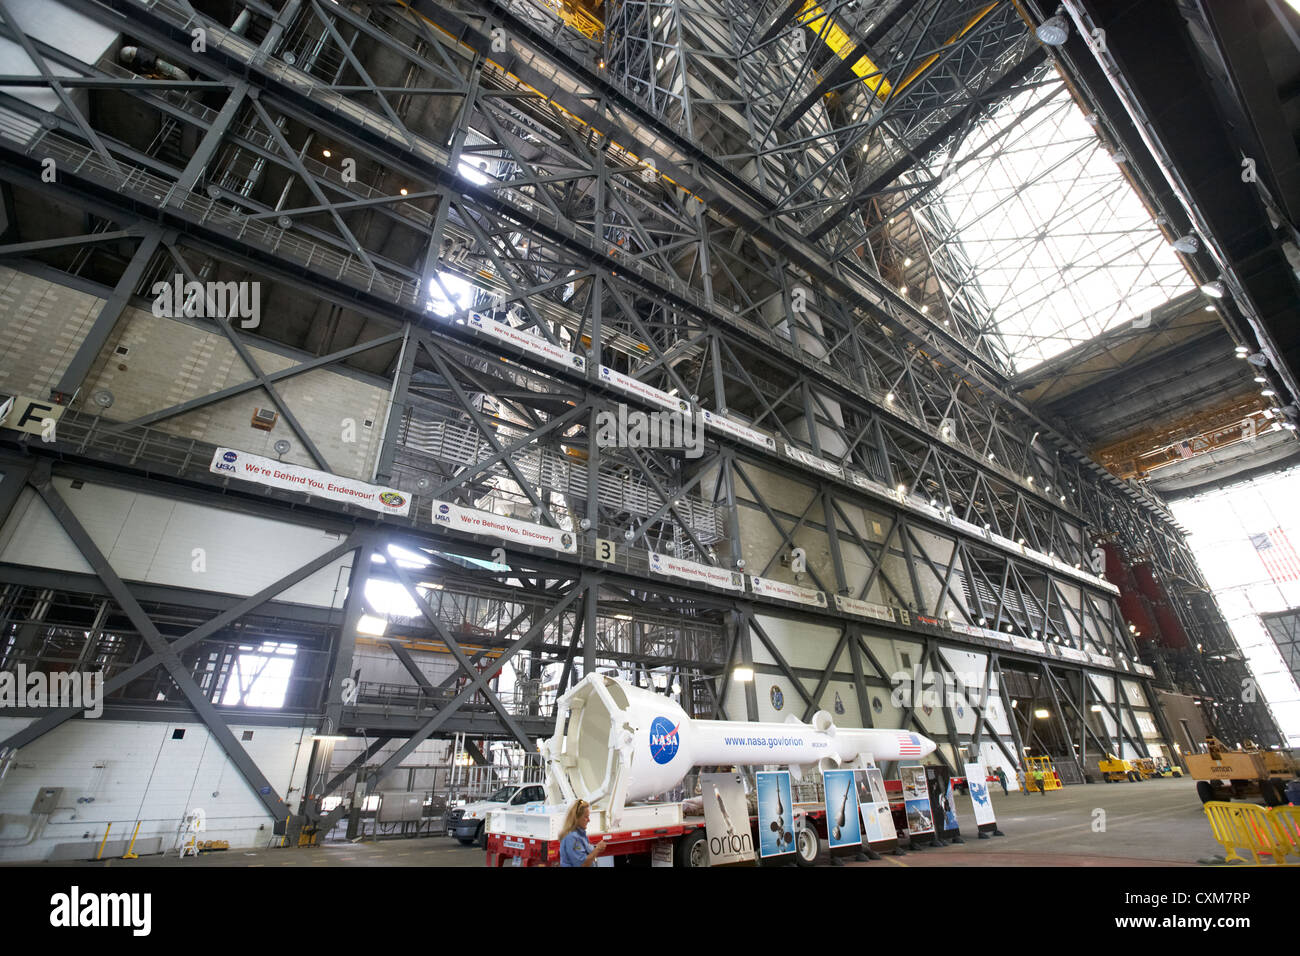 orion mockup and interior of the vehicle assembly building Kennedy Space Center Florida USA Stock Photo